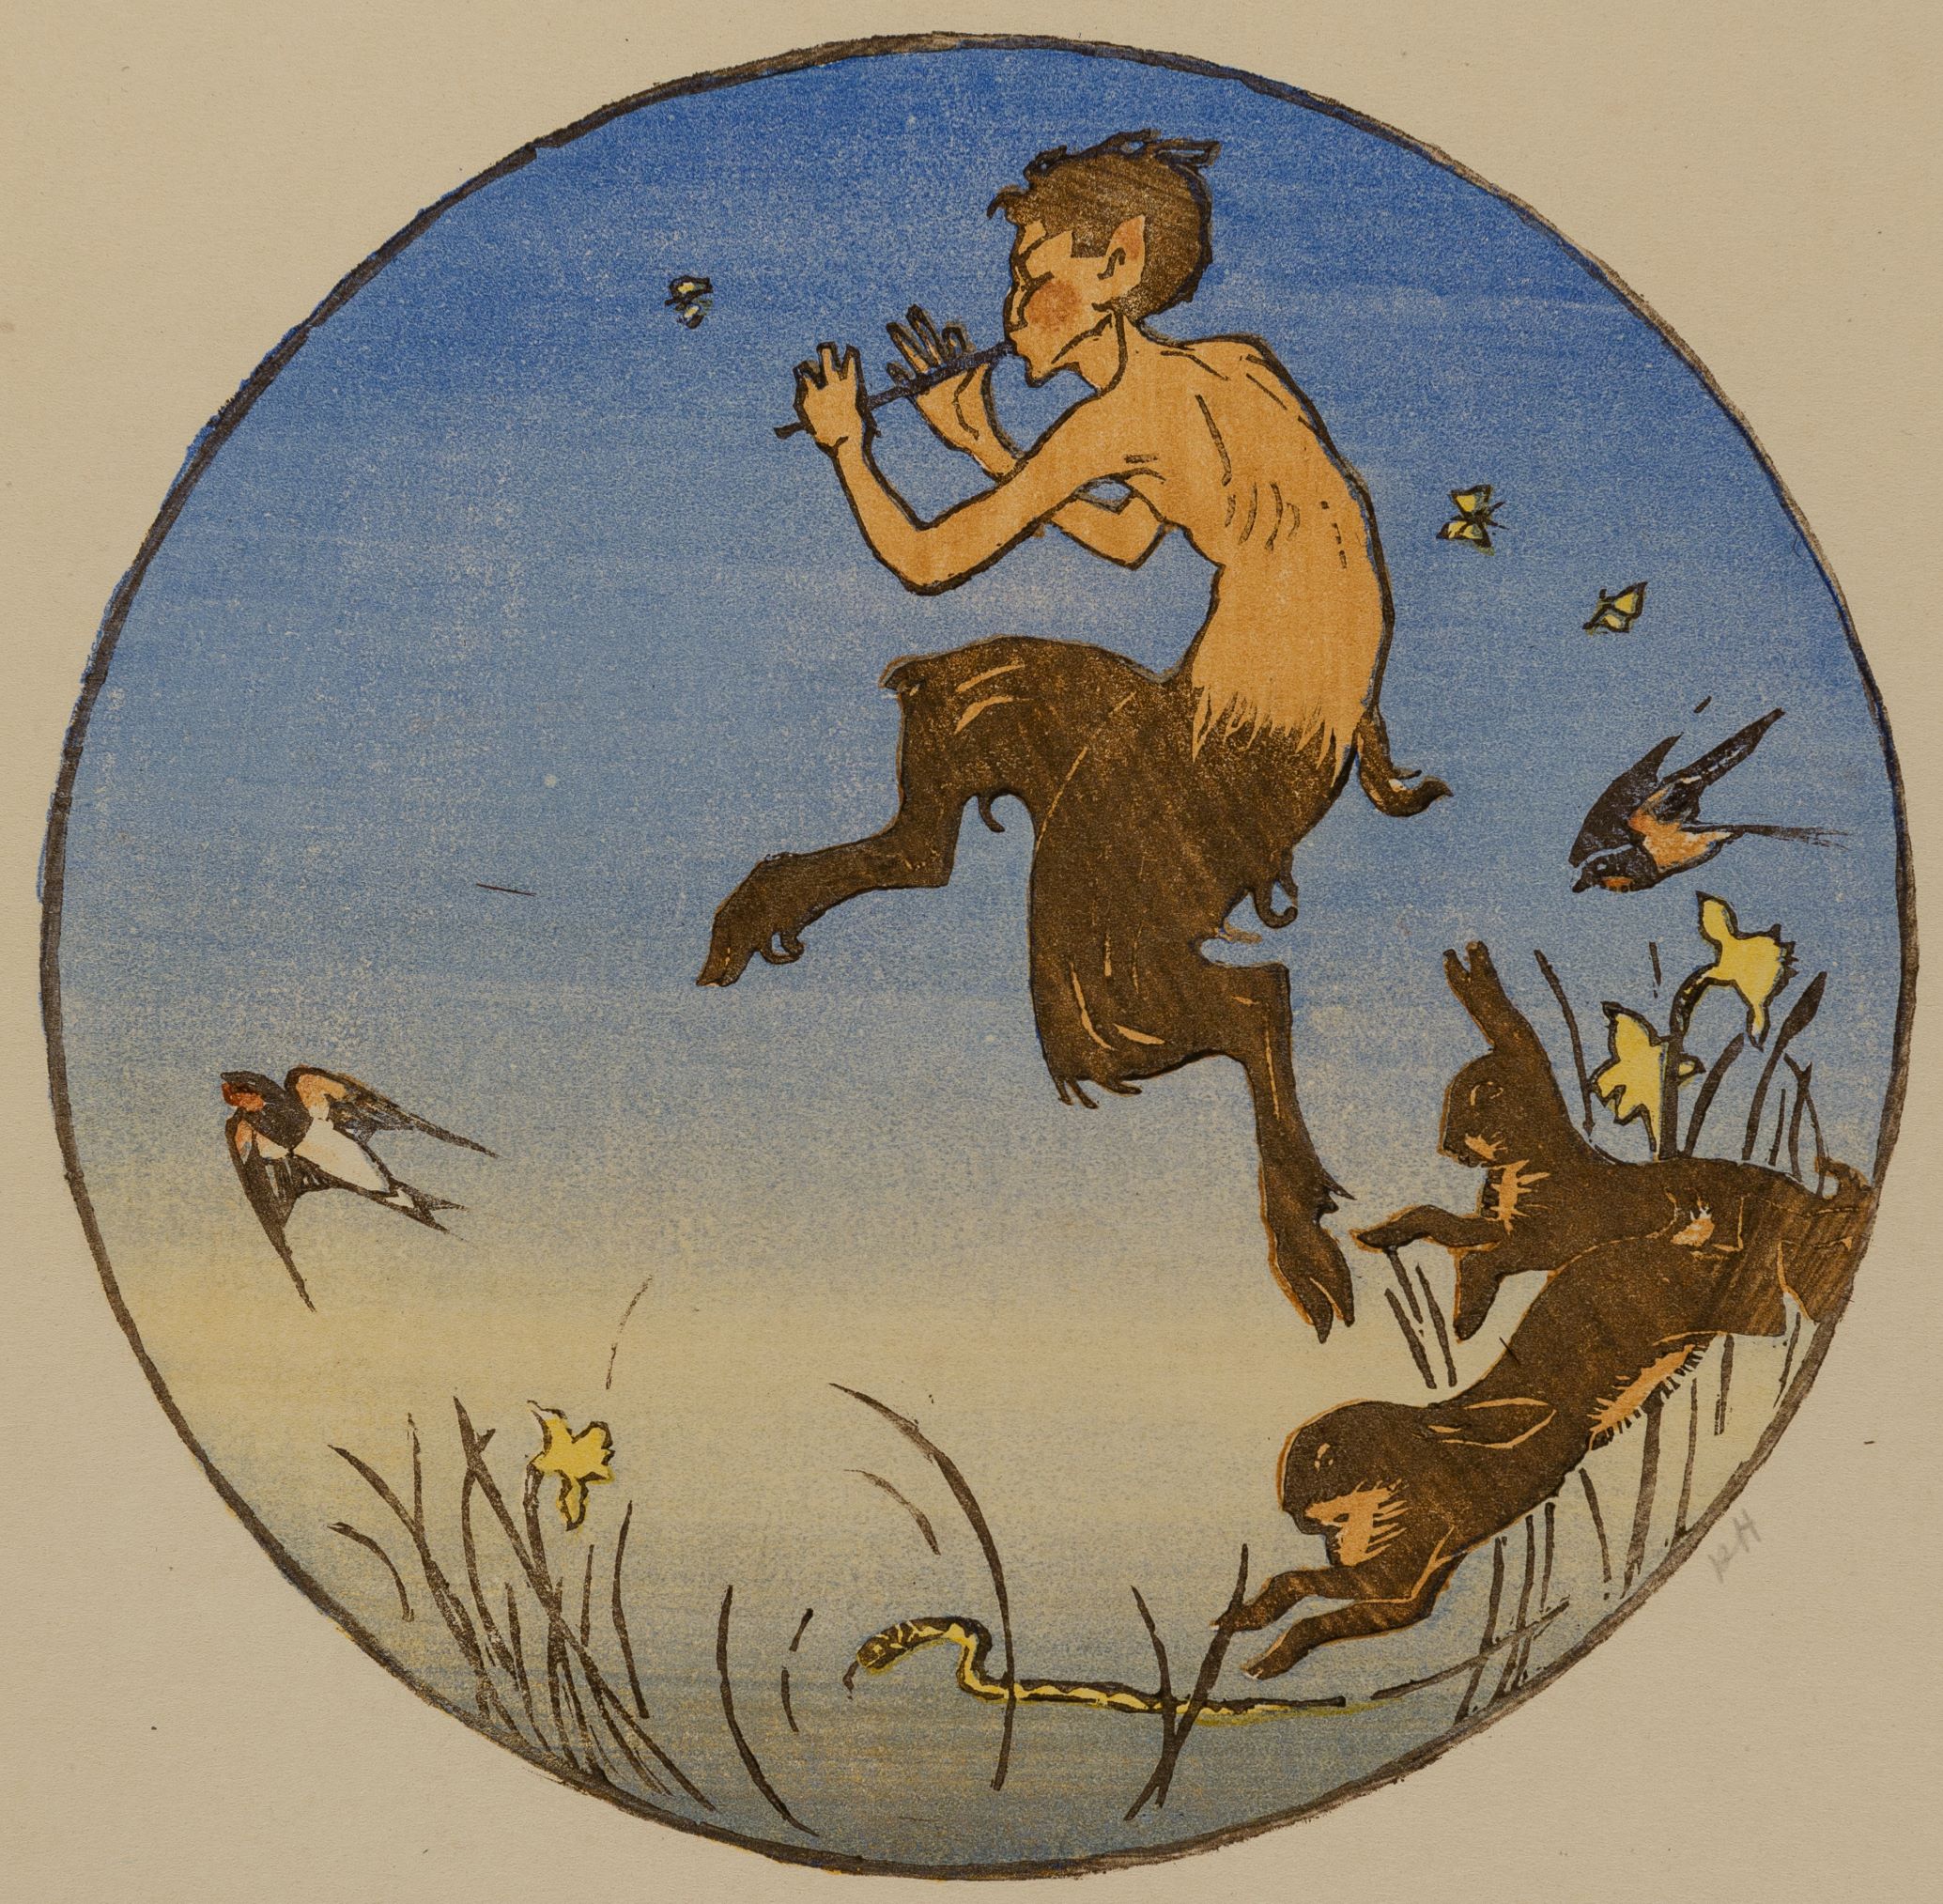 A fawn, with brown goat legs and human upper body, playing a pipe. He is surrounded by rabbits, birds and a snake